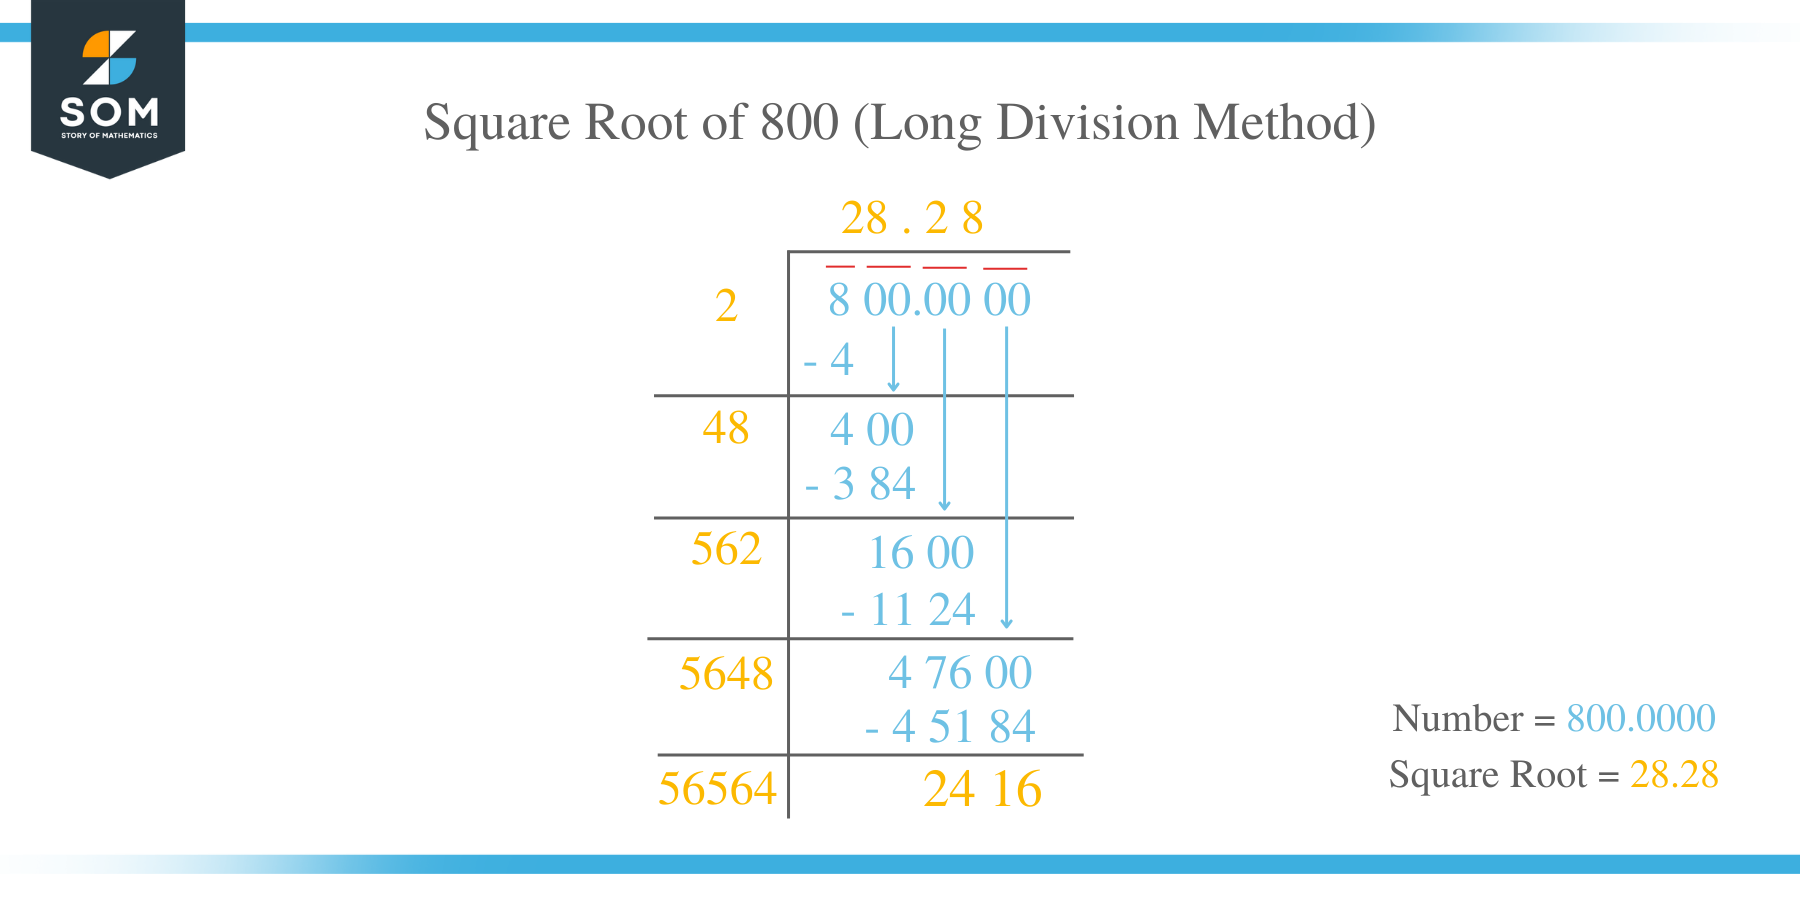 Square Root of 800 by Long Division Method